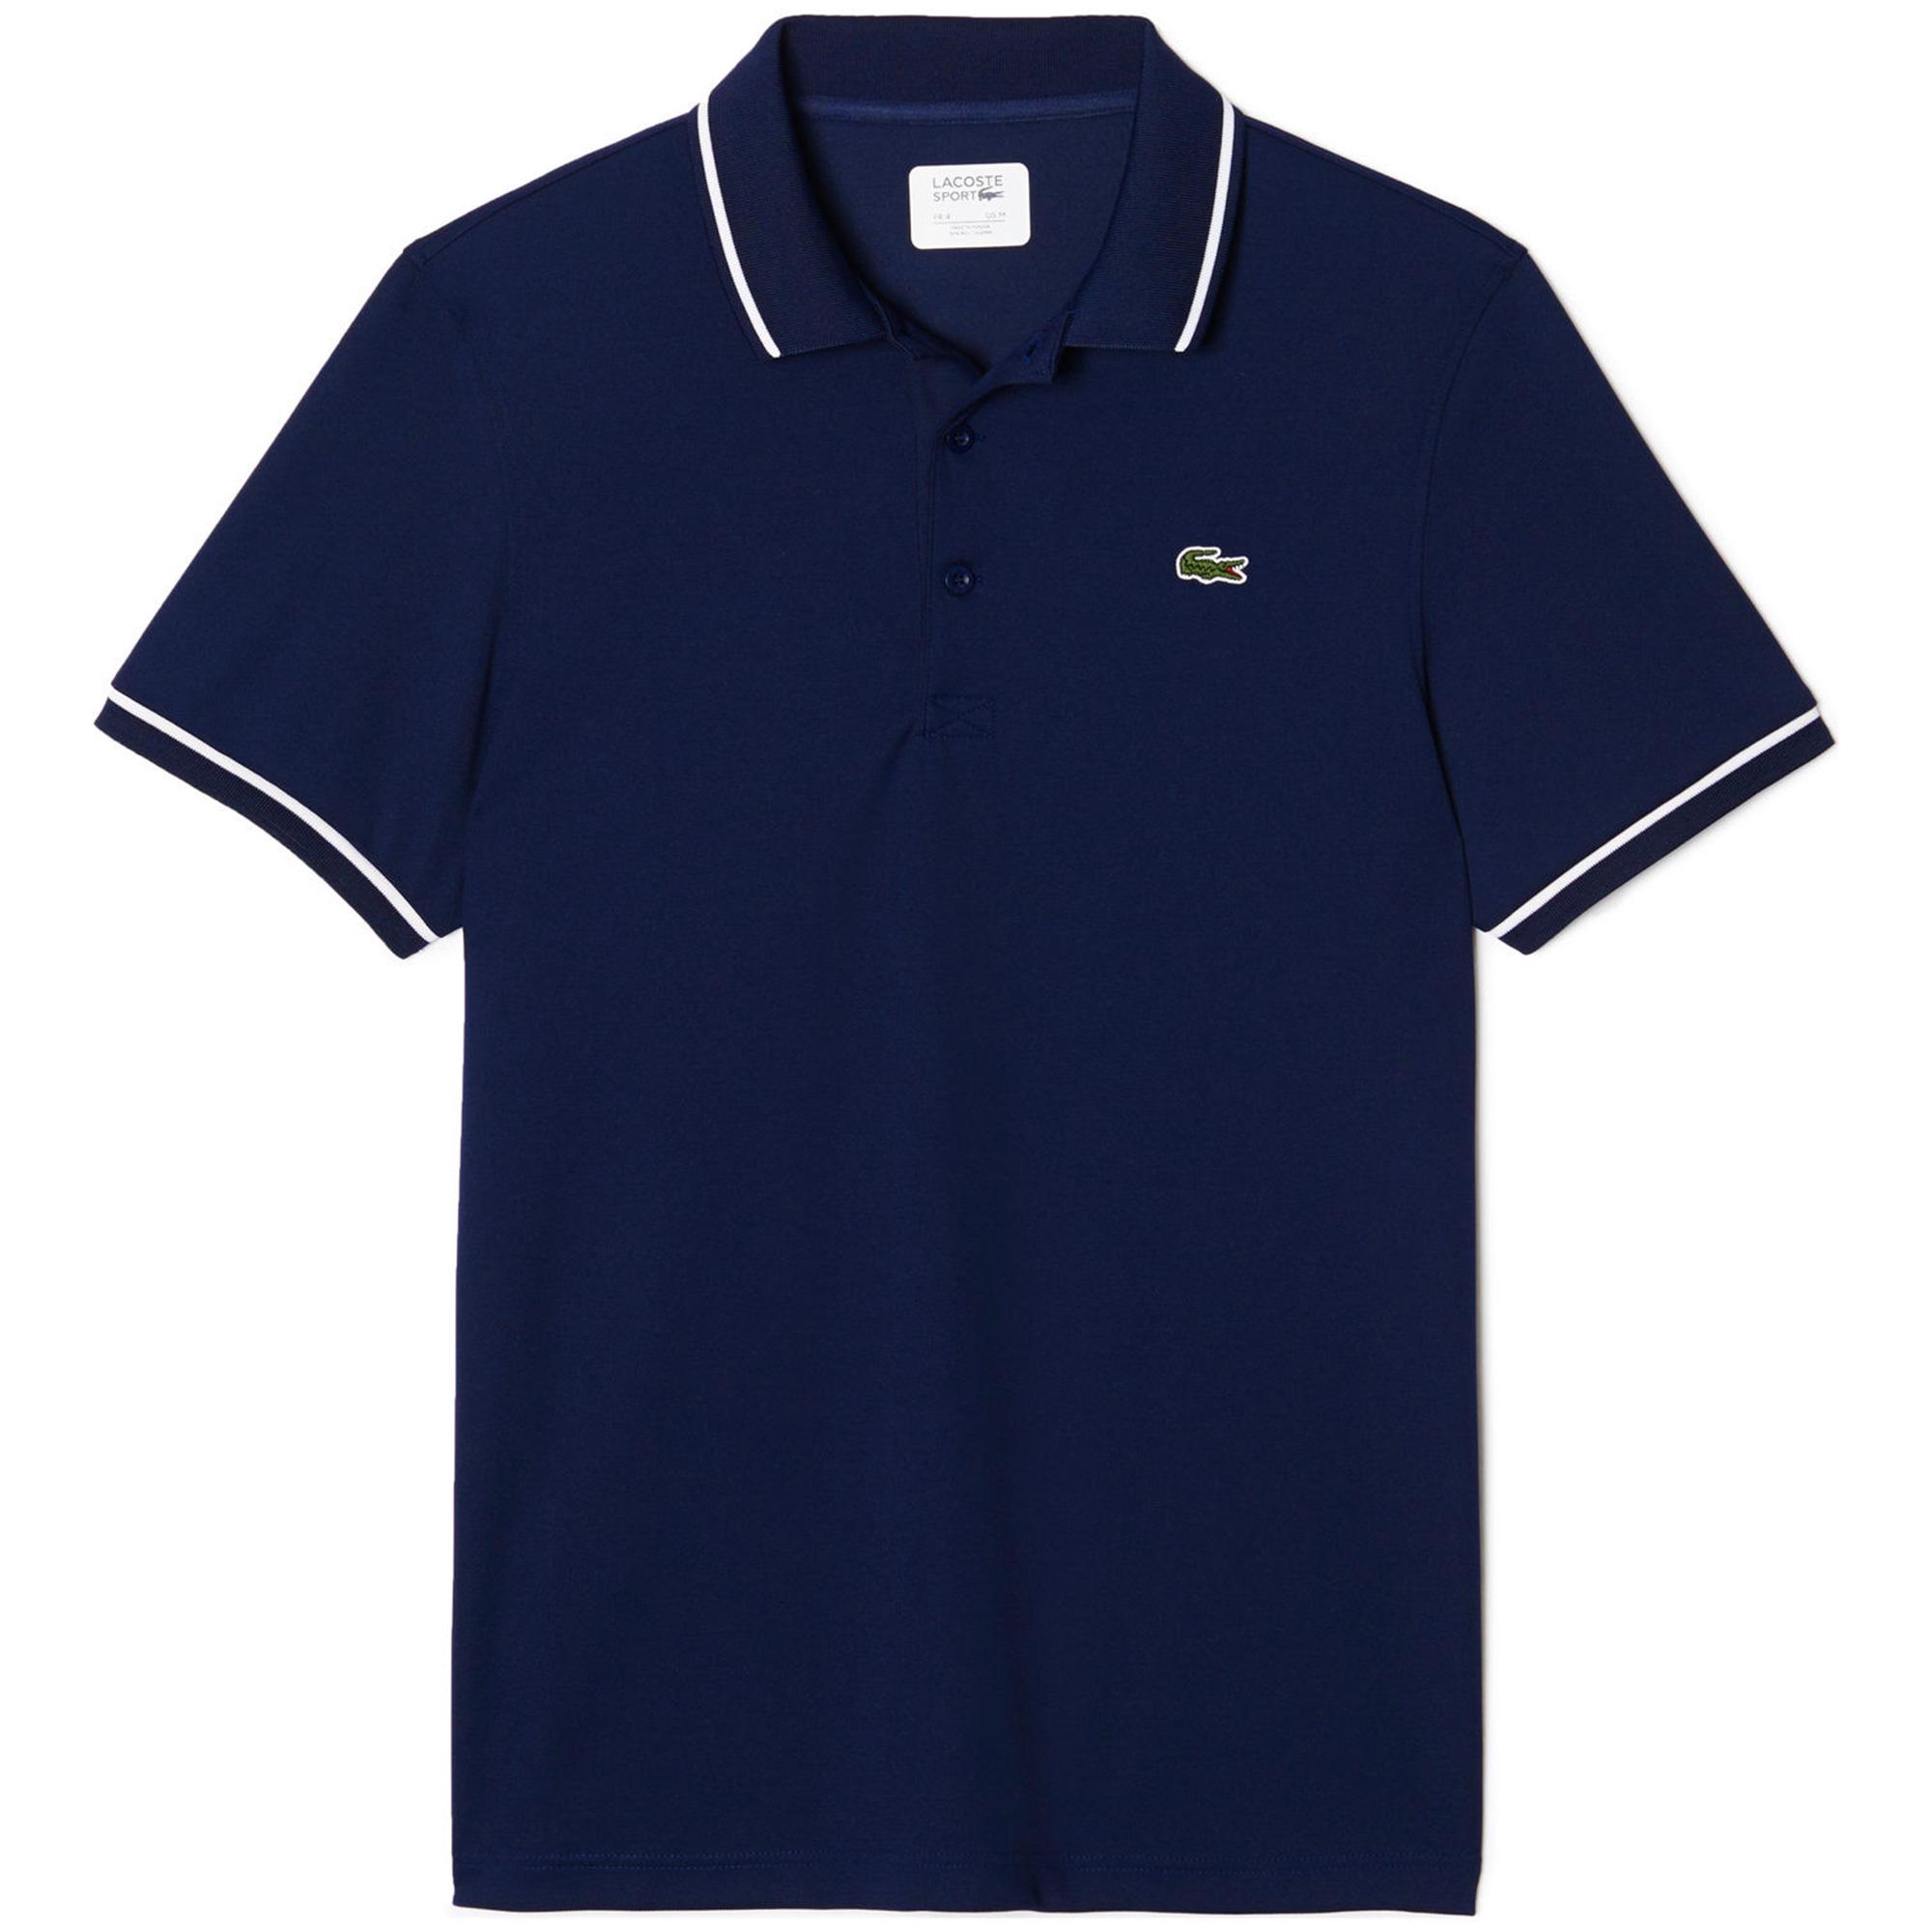 Lacoste Sport Mens Ultra-Dry Tennis Polo - Navy/White ...